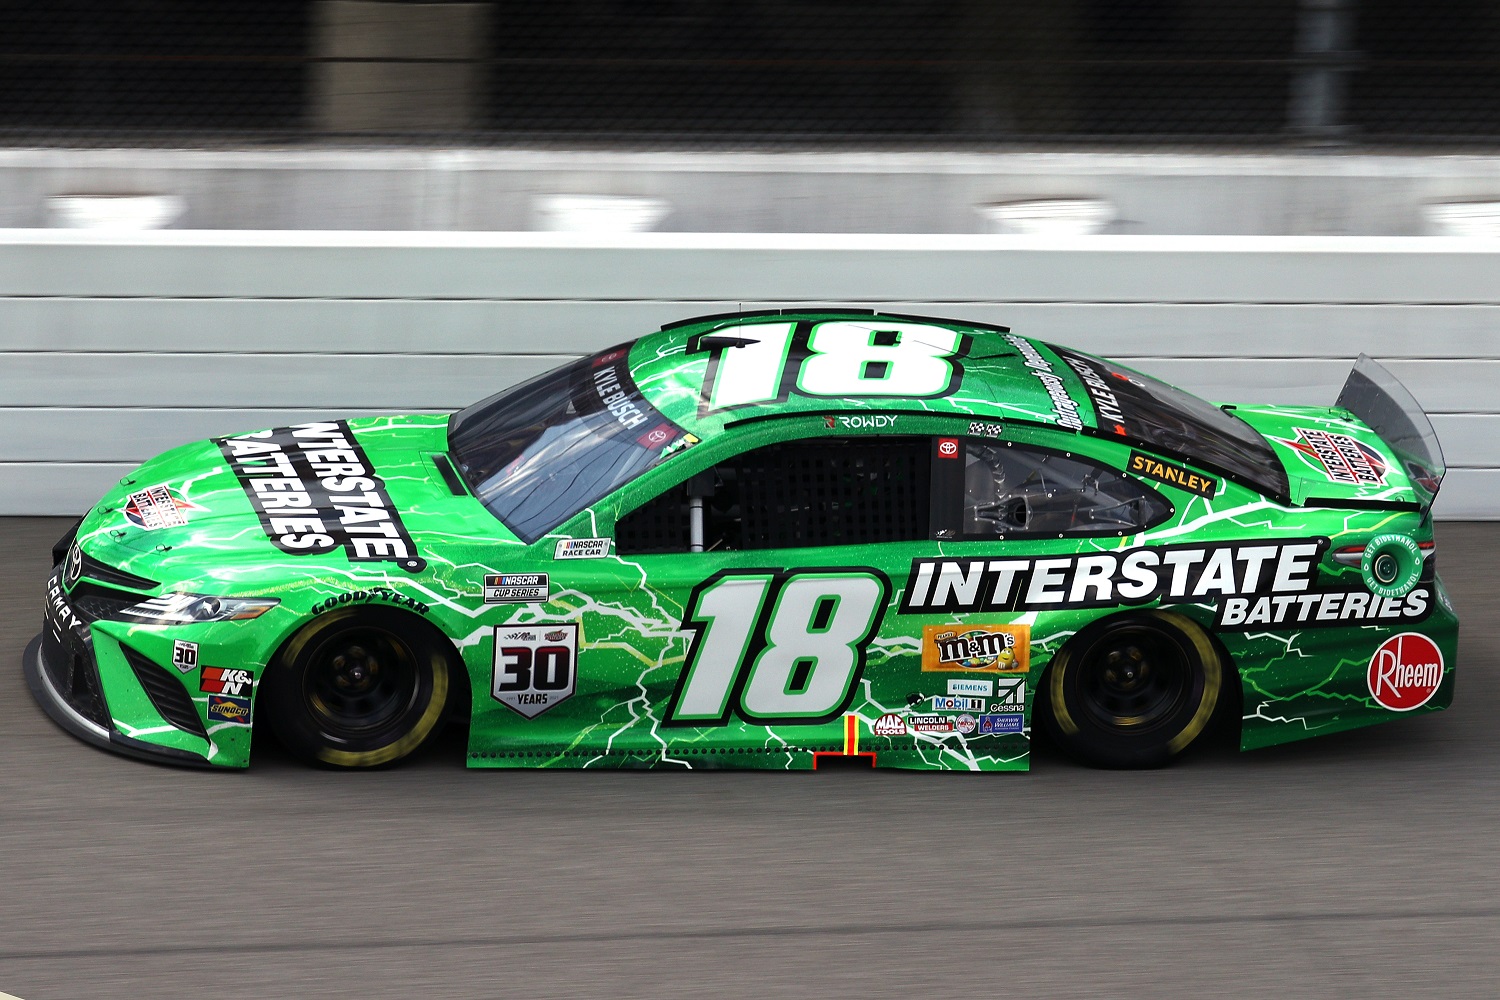 Kyle Busch, driver of the No. 18 Interstate Batteries Toyota, competes in the NASCAR Cup Series FireKeepers Casino 400 at Michigan International Speedway on Aug. 22, 2021. | Sean Gardner/Getty Images